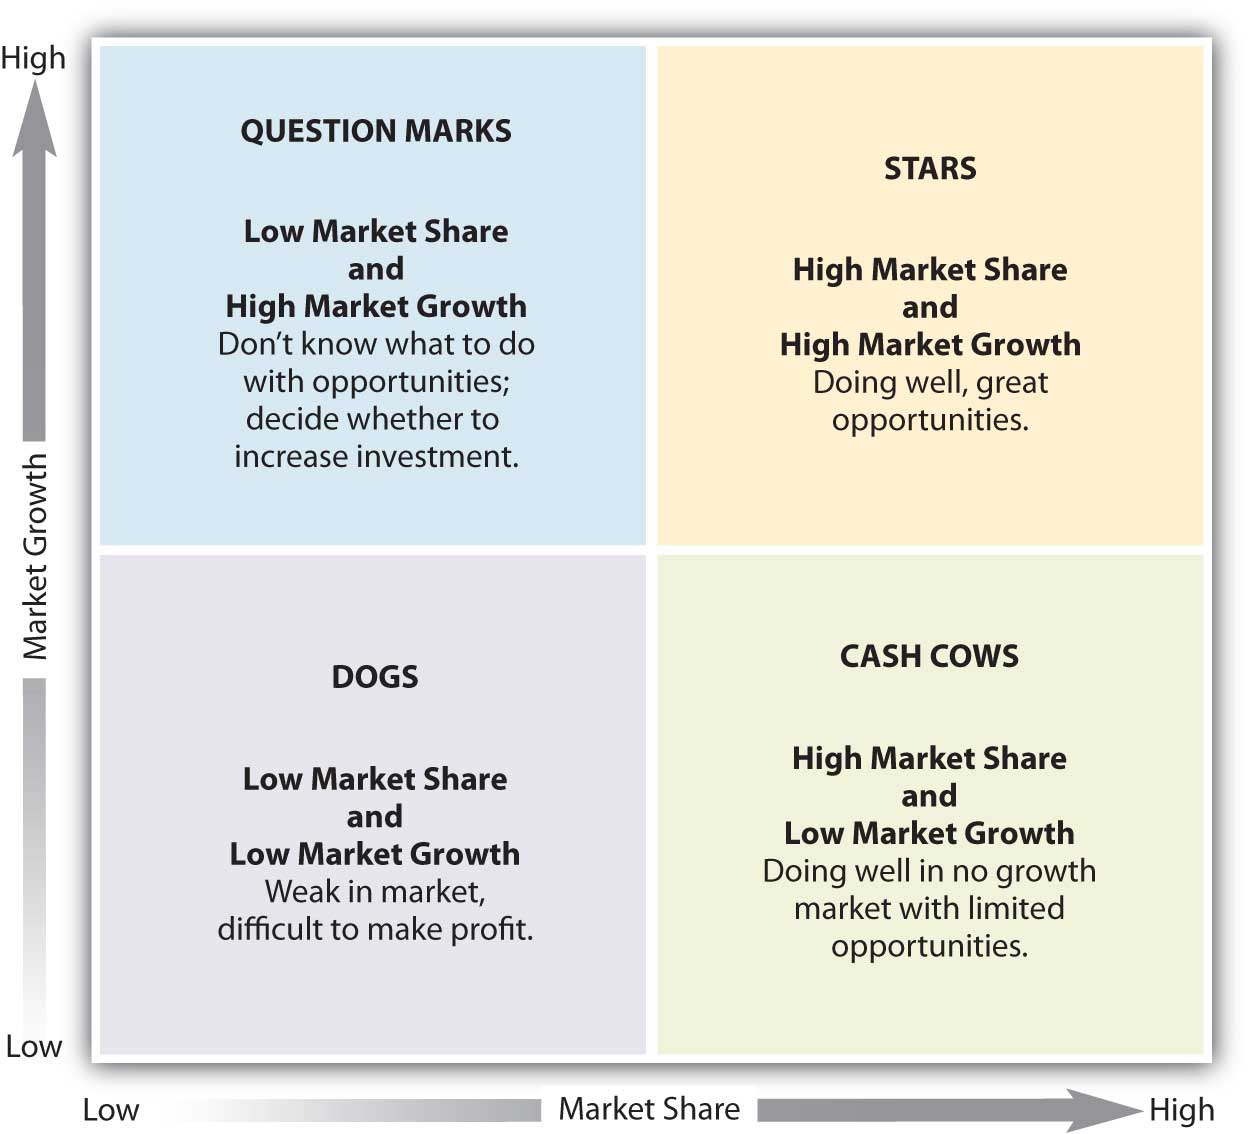 bcg growth share matrix used in healthcare